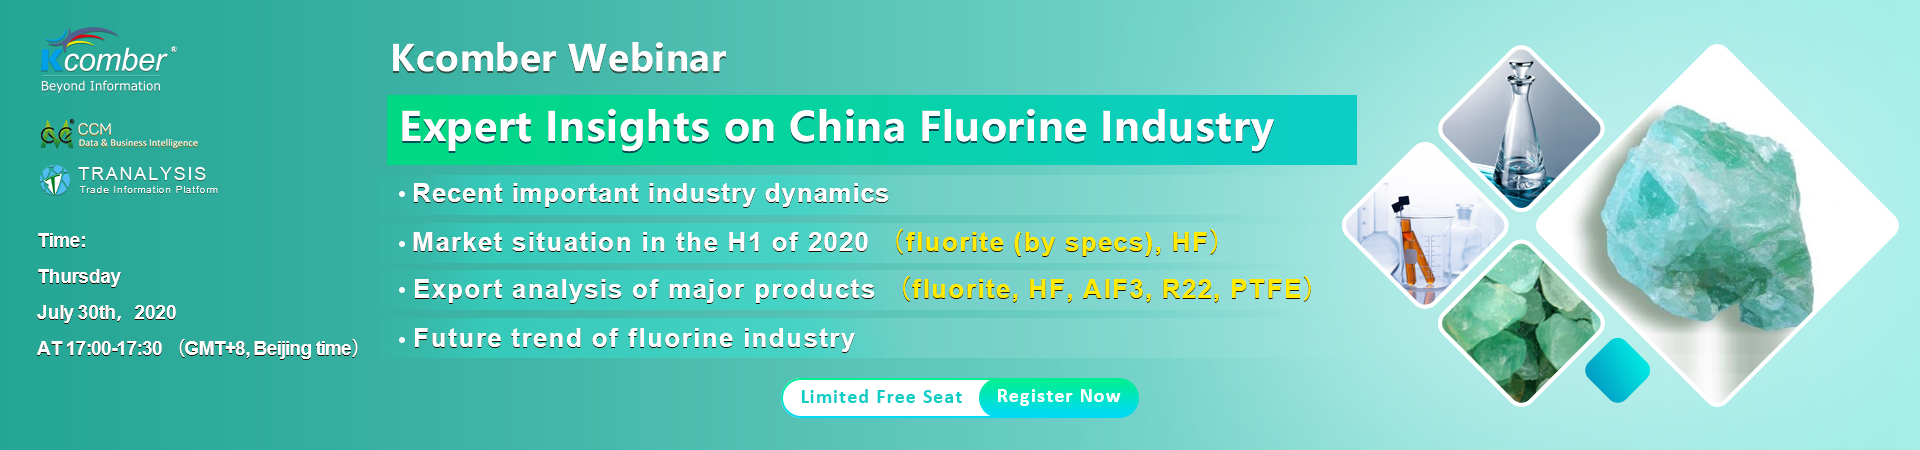 Expert Insights on China Fluorine Industry